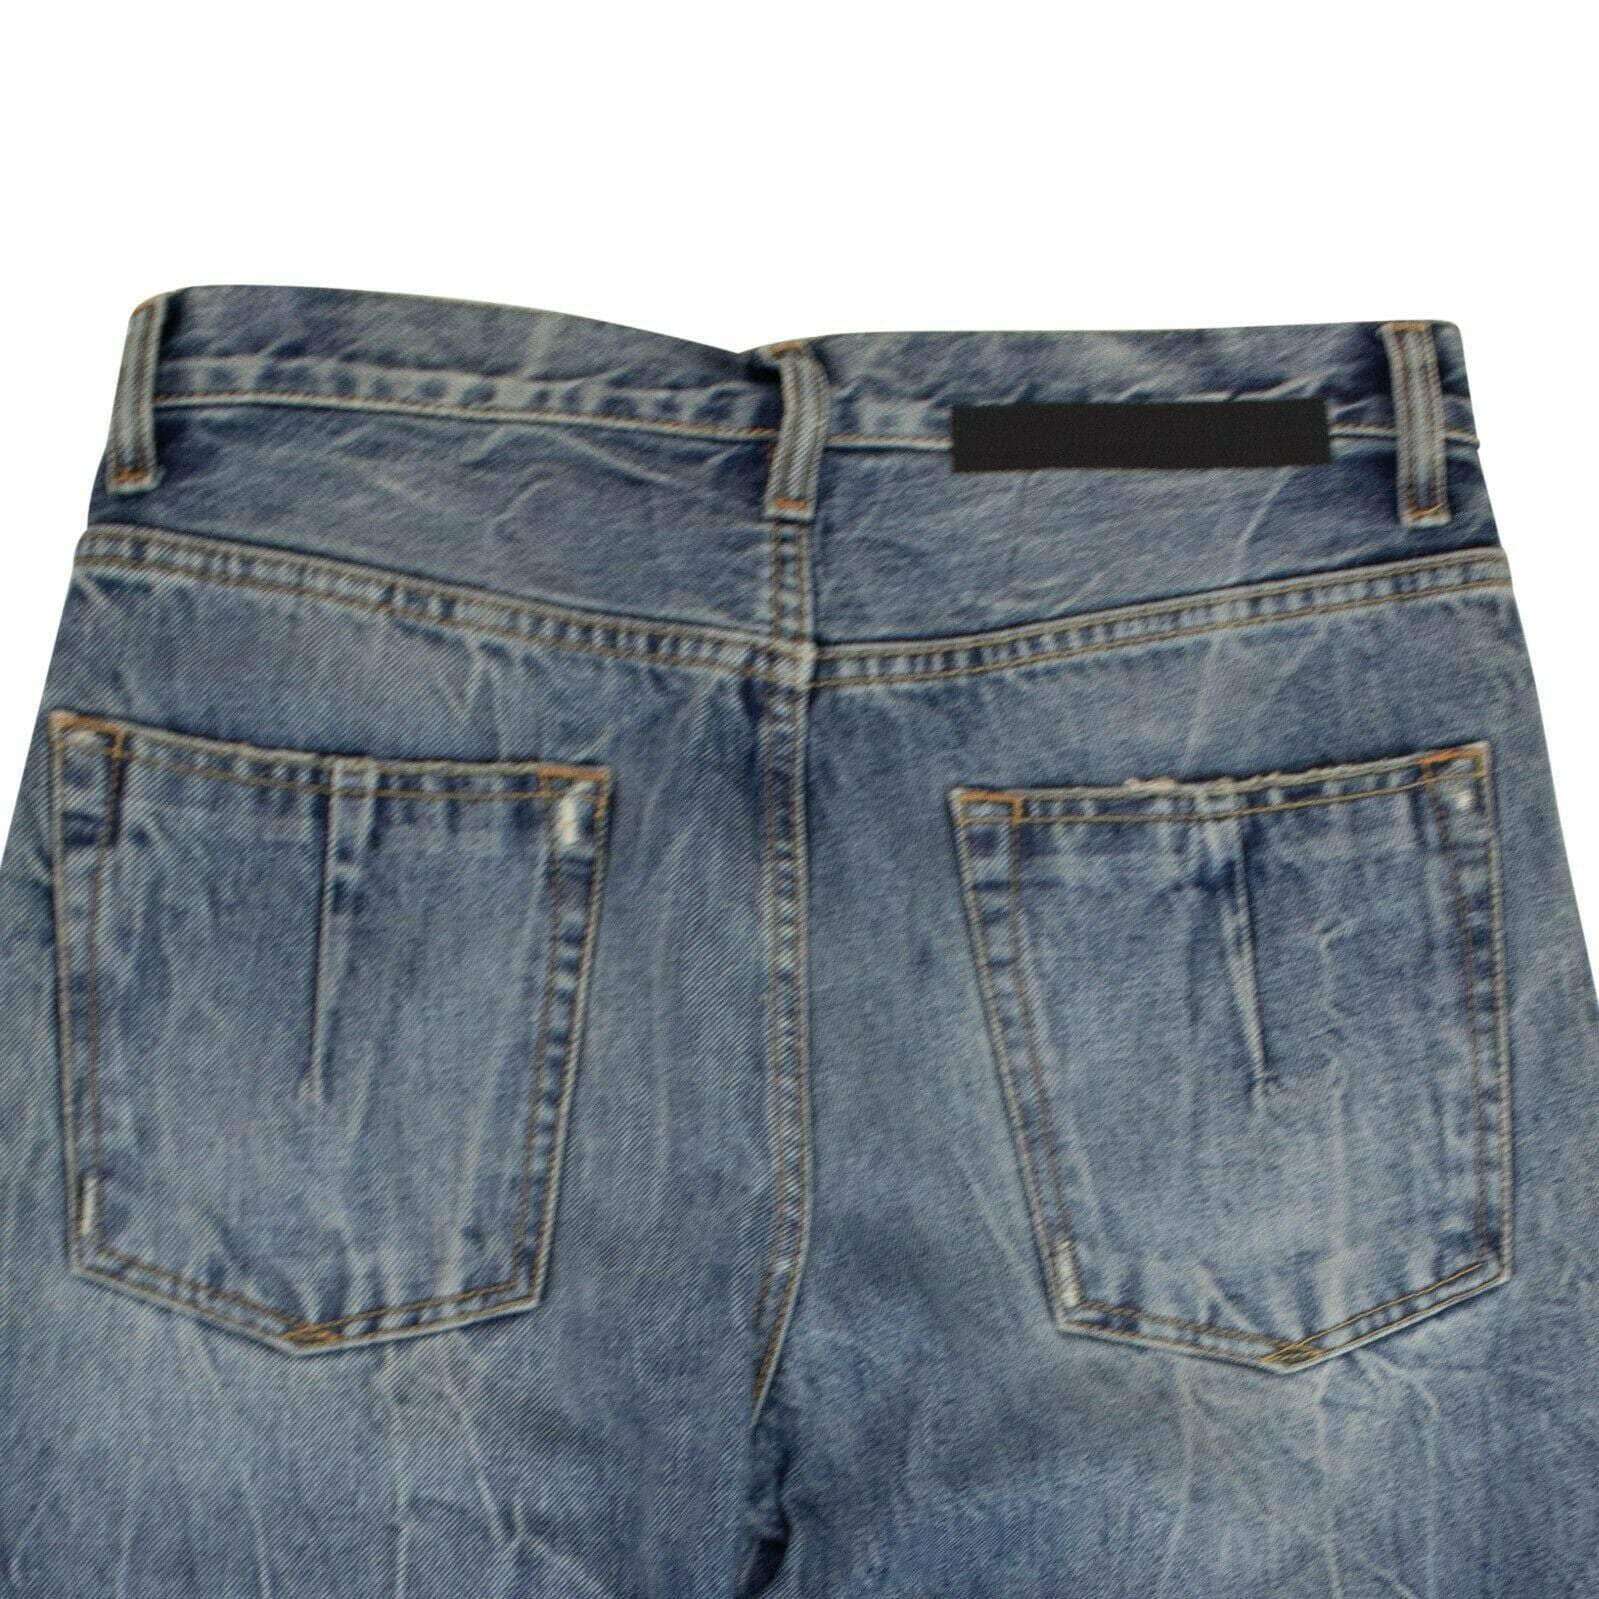 UNRAVEL PROJECT channelenable-all, couponcollection, gender-mens, main-clothing, mens-straight-fit-jeans, size-26, under-250, unravel-project 26 Blue Moonwash Straight Leg Jeans 82NGG-UN-1191/26 82NGG-UN-1191/26